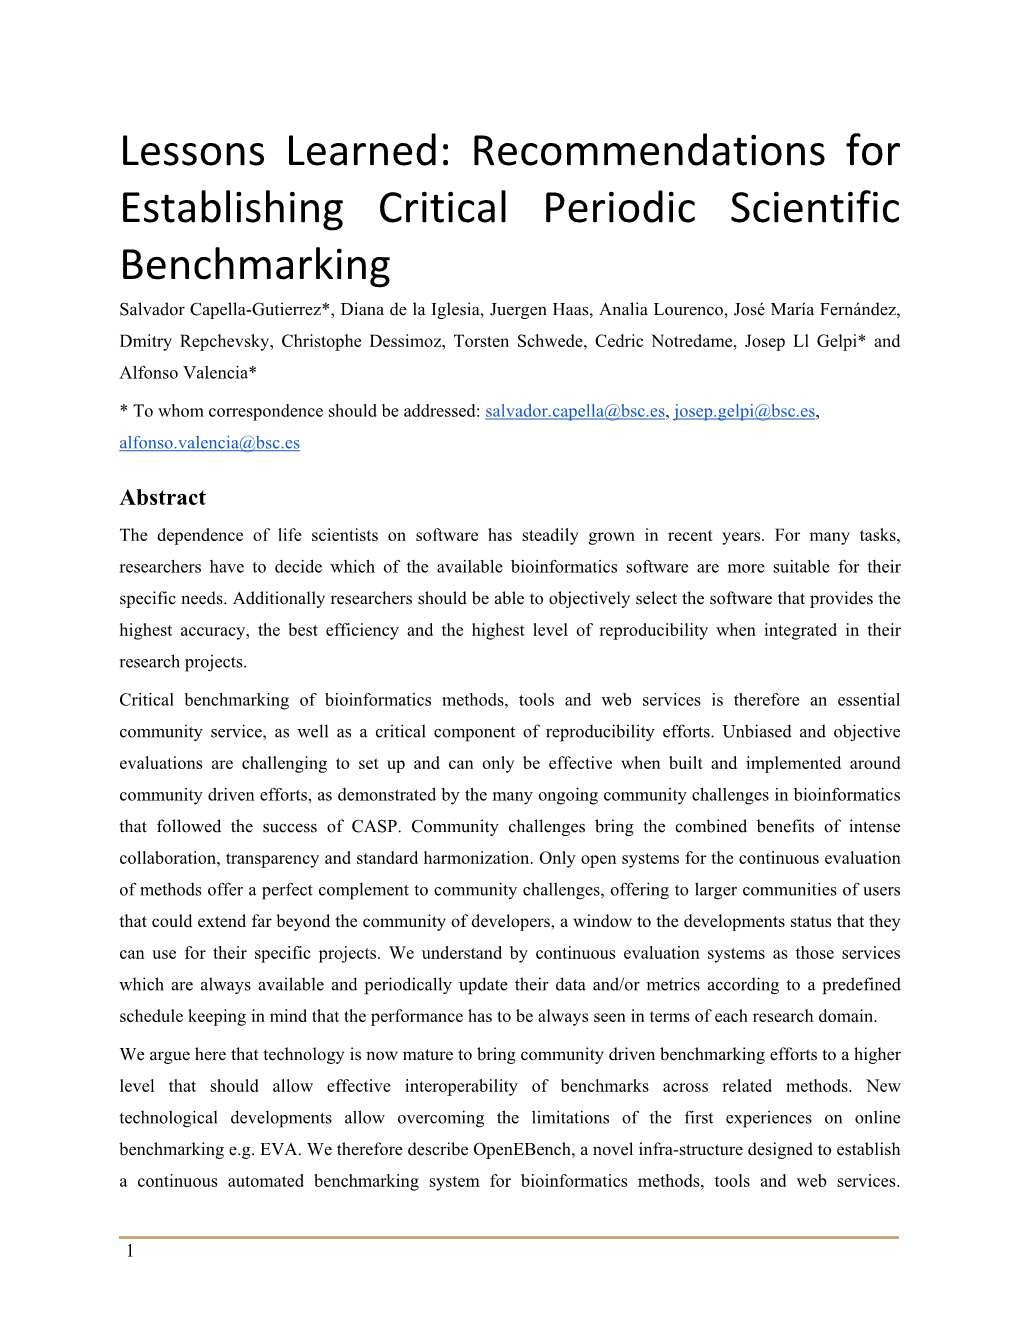 Lessons Learned: Recommendations for Establishing Critical Periodic Scientific Benchmarking